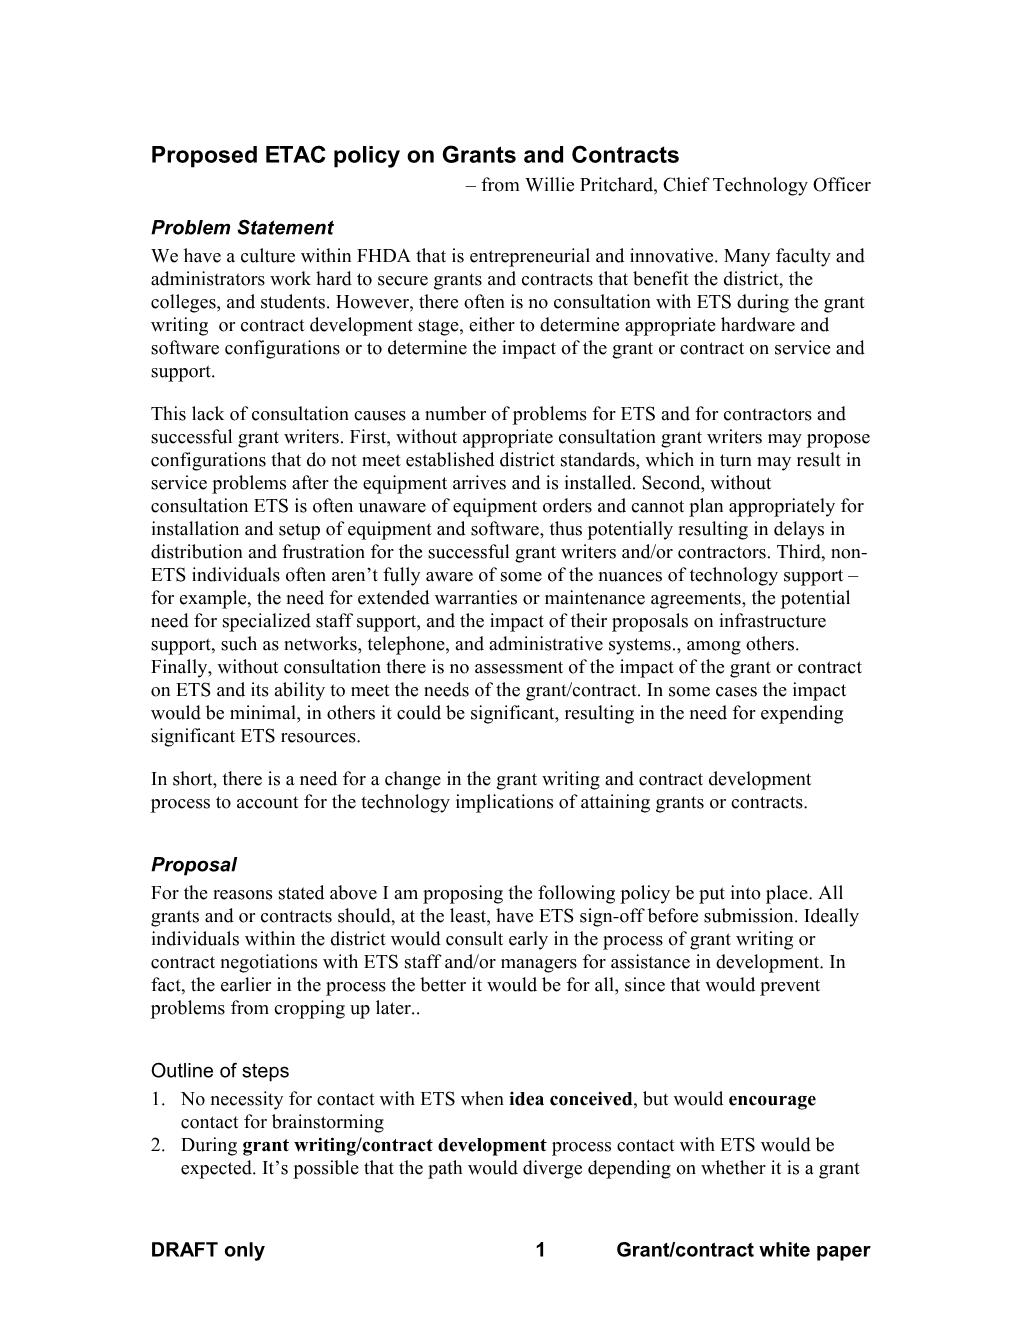 White Paper on a Proposed ETAC Policy on Grants and Contracts